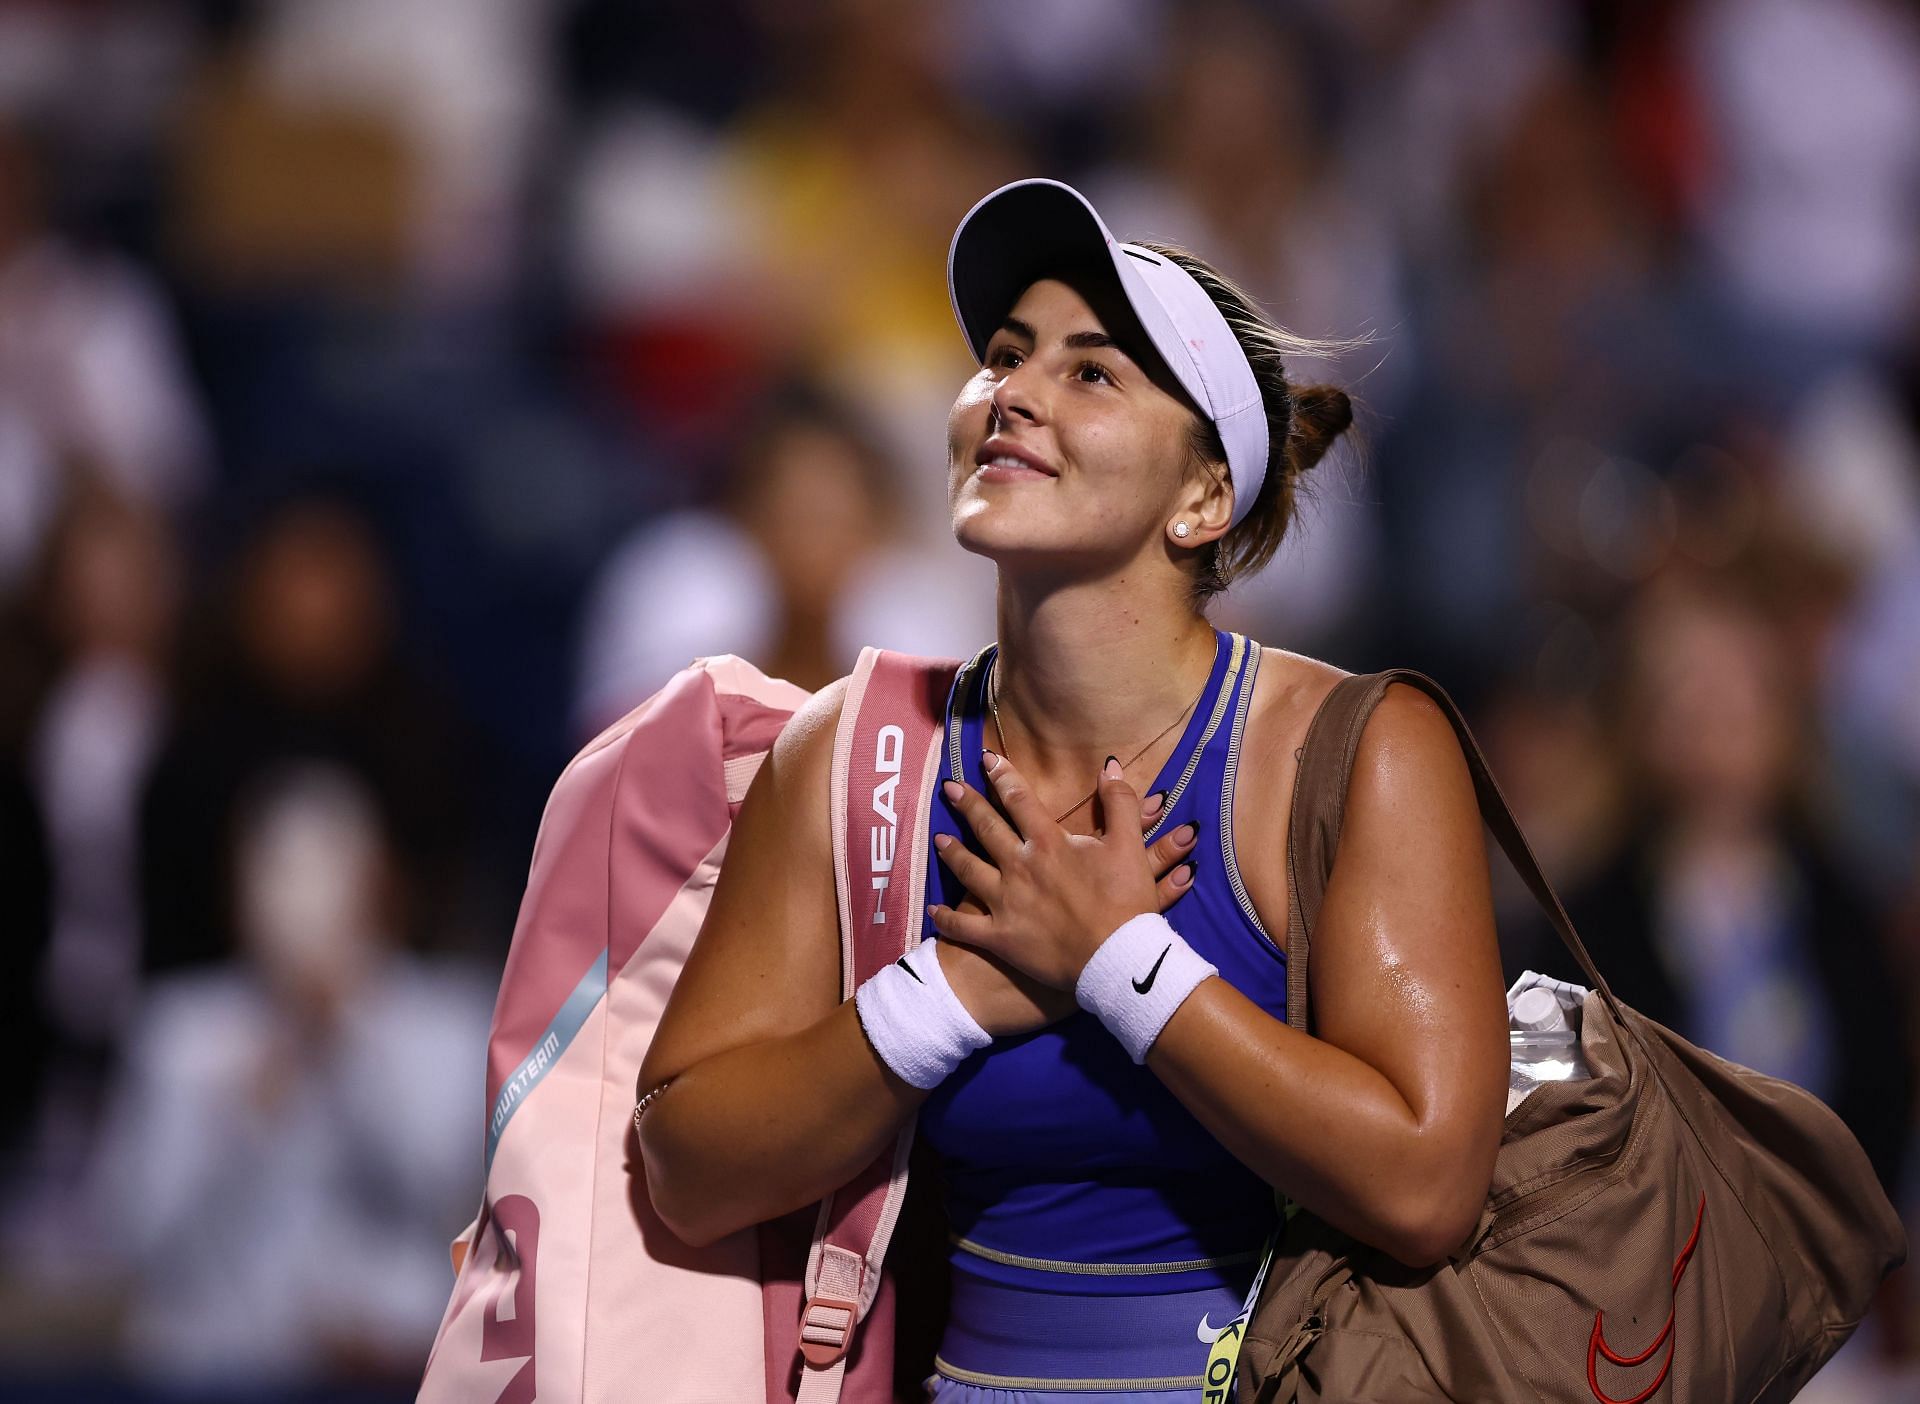 Bianca Andreescu takes on Beatriz Haddad Maia in the second round of the 2022 US Open